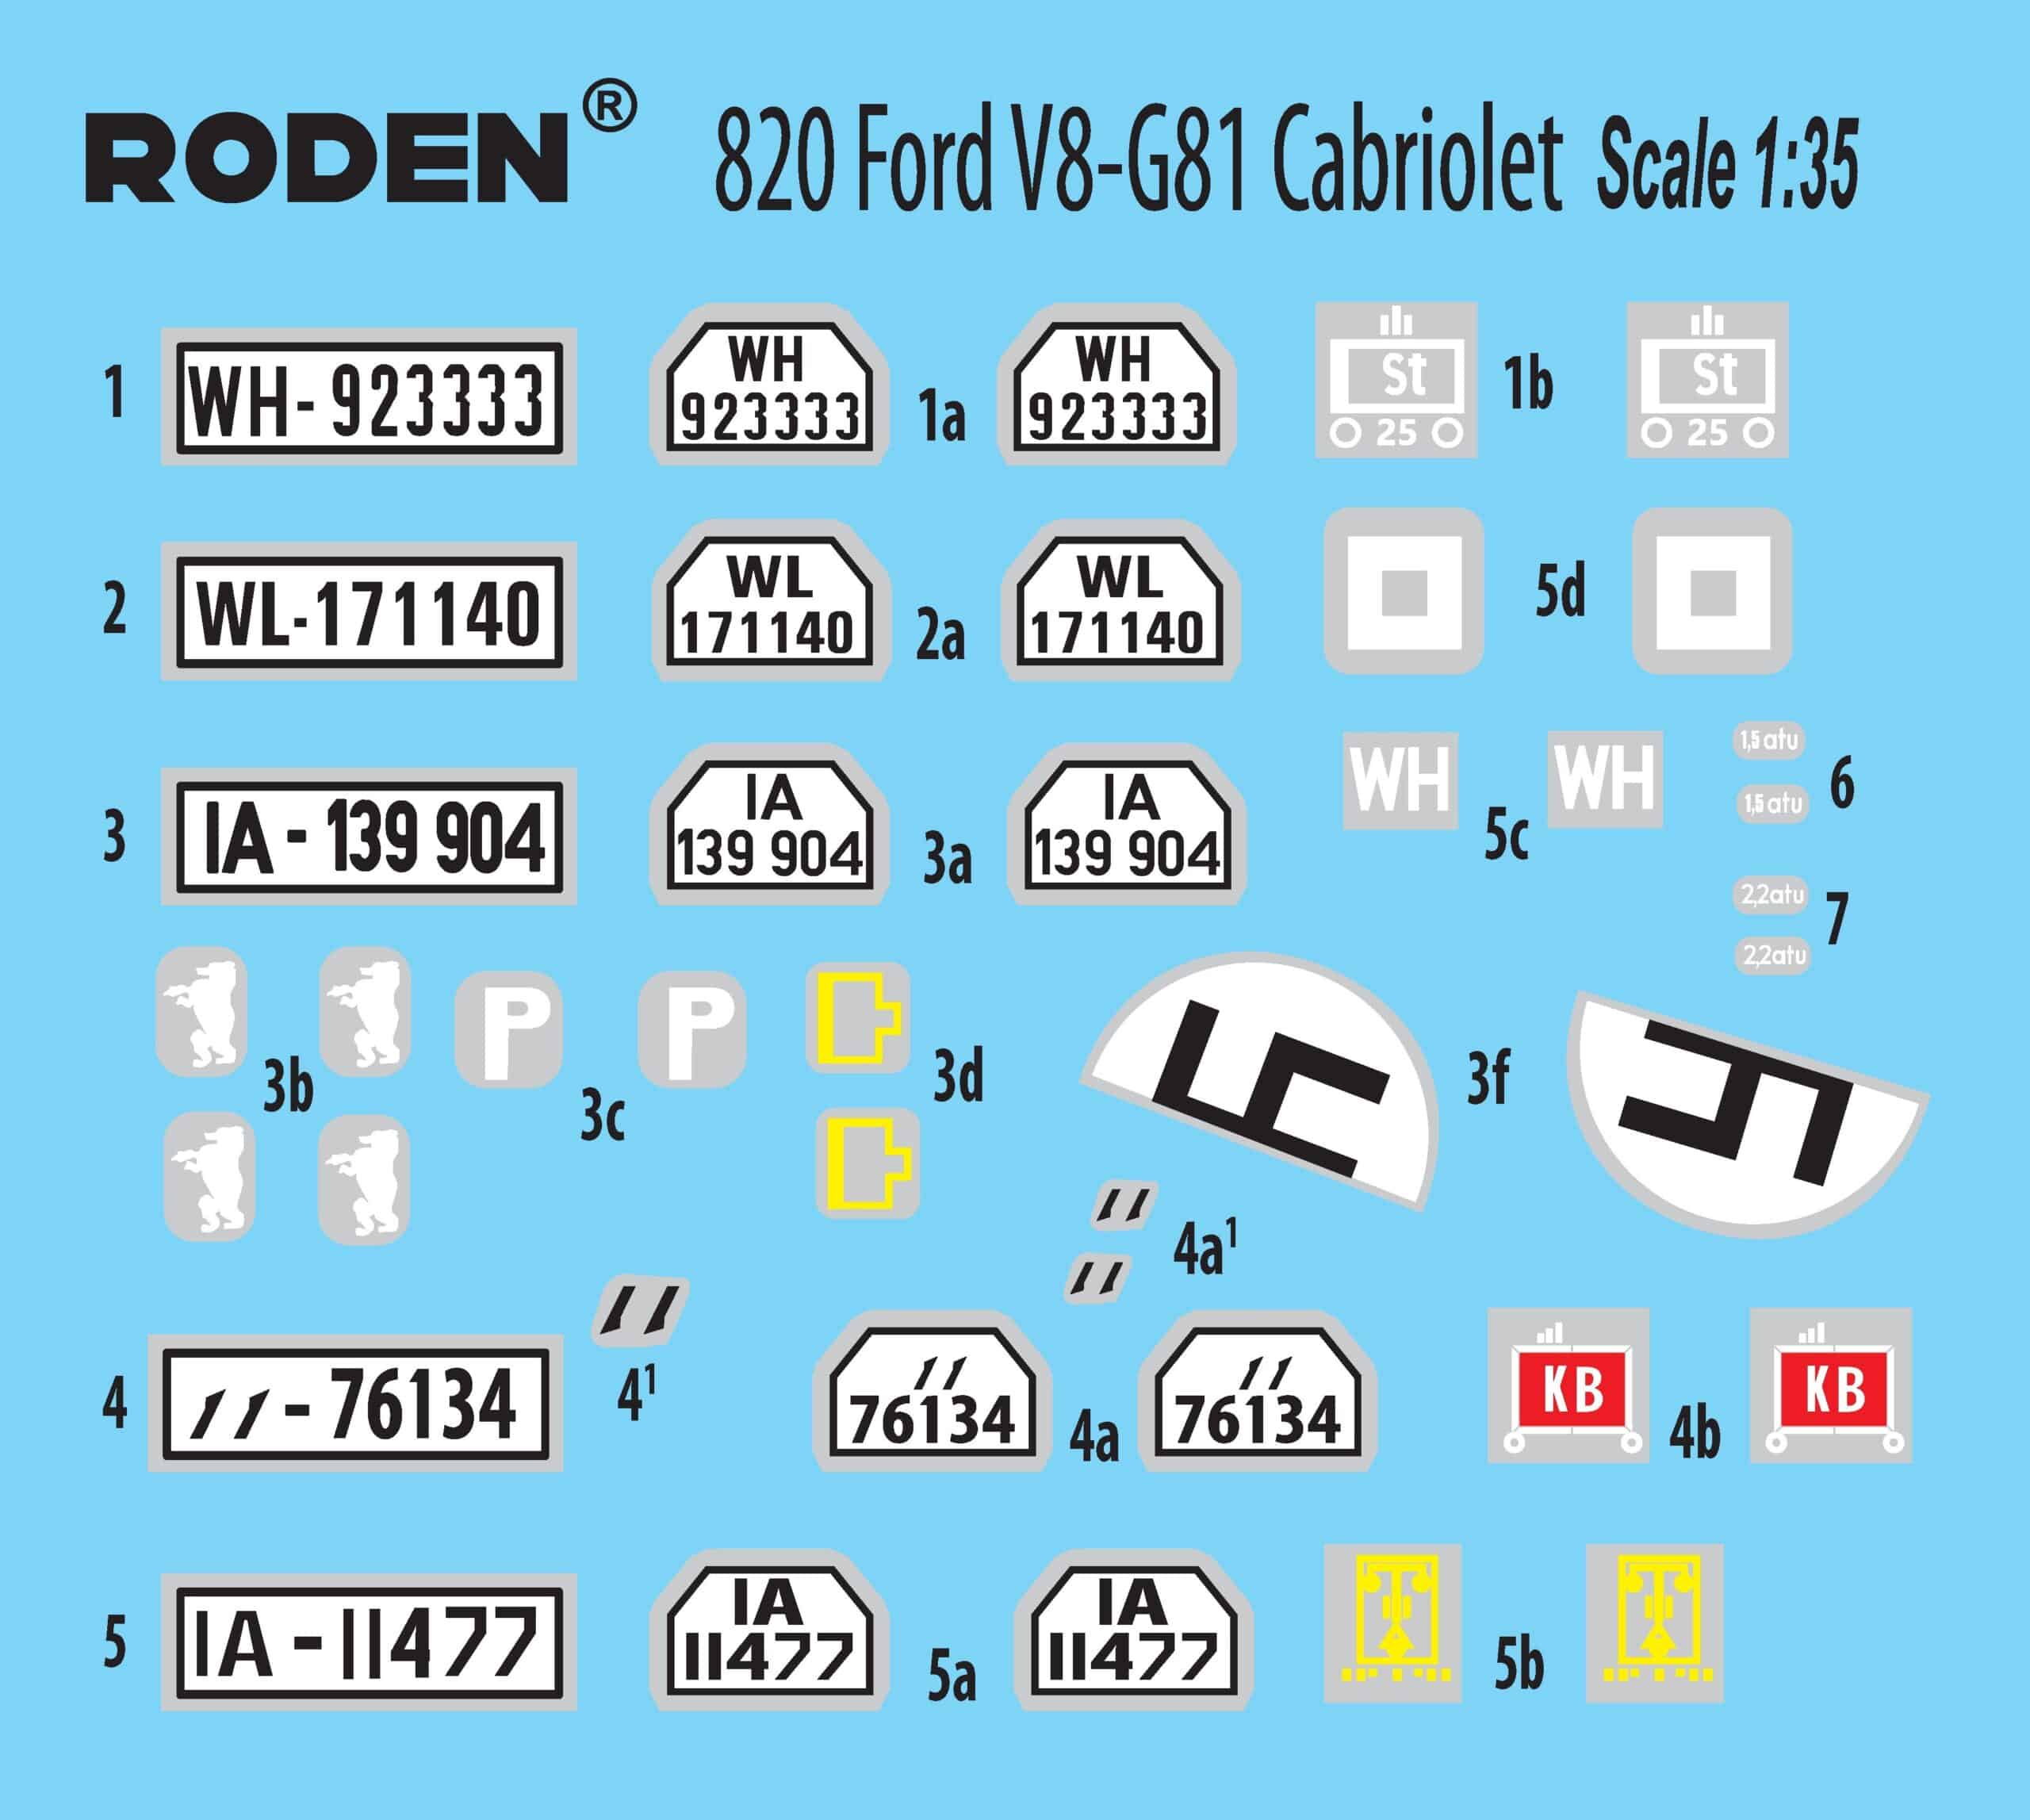 Roden Releases 135 Scale Ford V8-G81 Cabriolet Model Decals